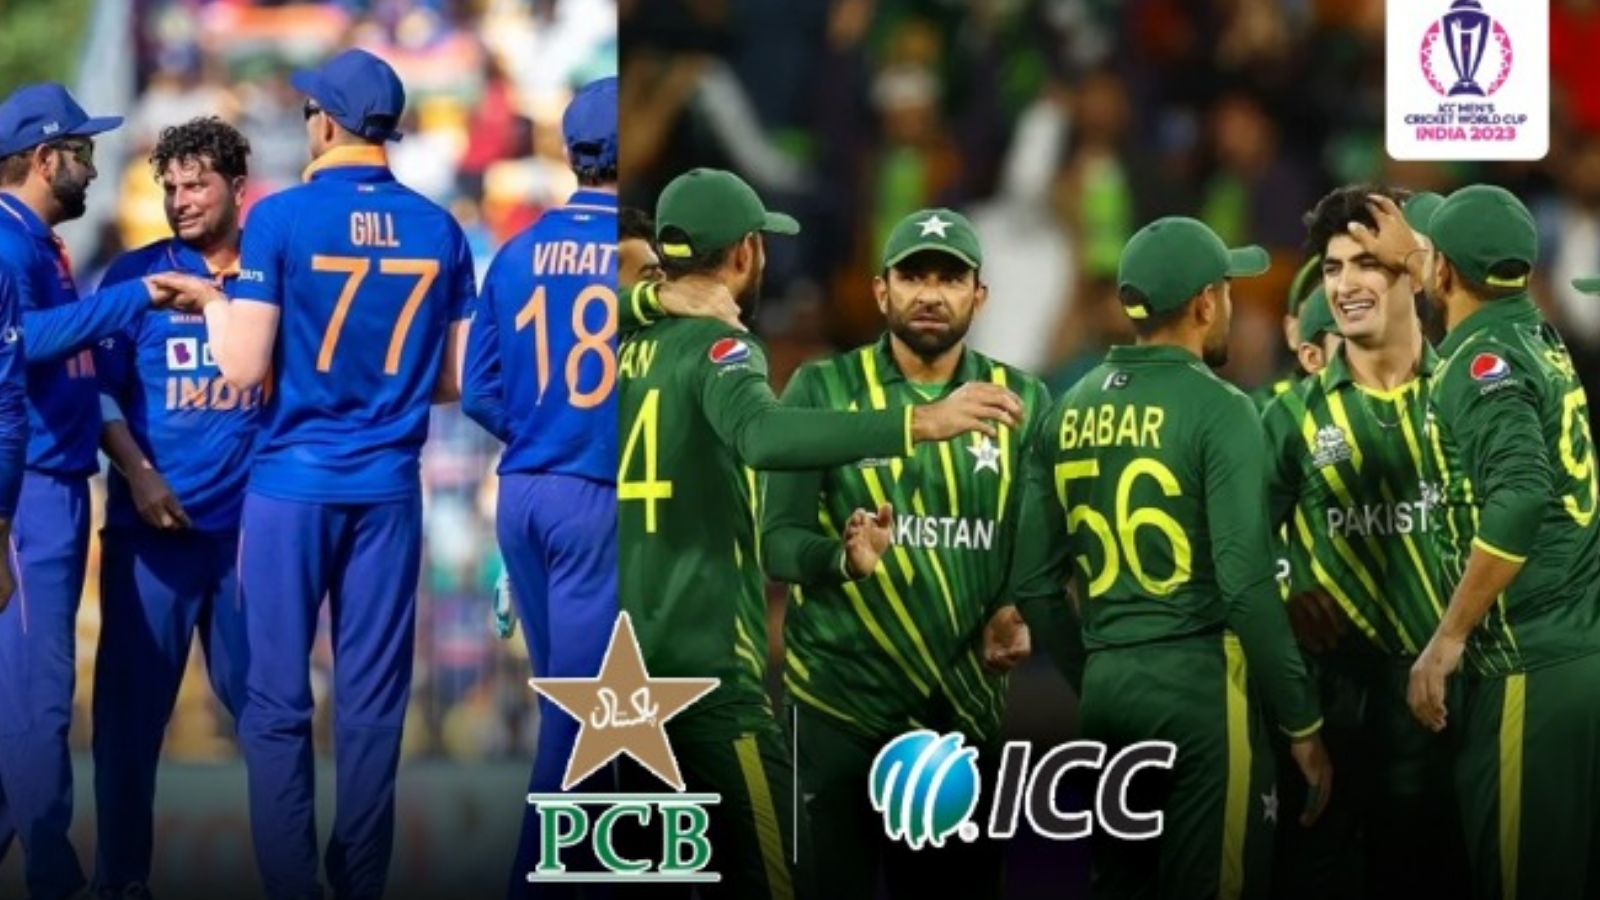 World-Cup-2023-Icc-Has-Fixed-The-Time-To-Announce-The-Team-Of-The-World-Cup-Pakistan-Is-Under-Pressure-Due-To-The-New-Instructions